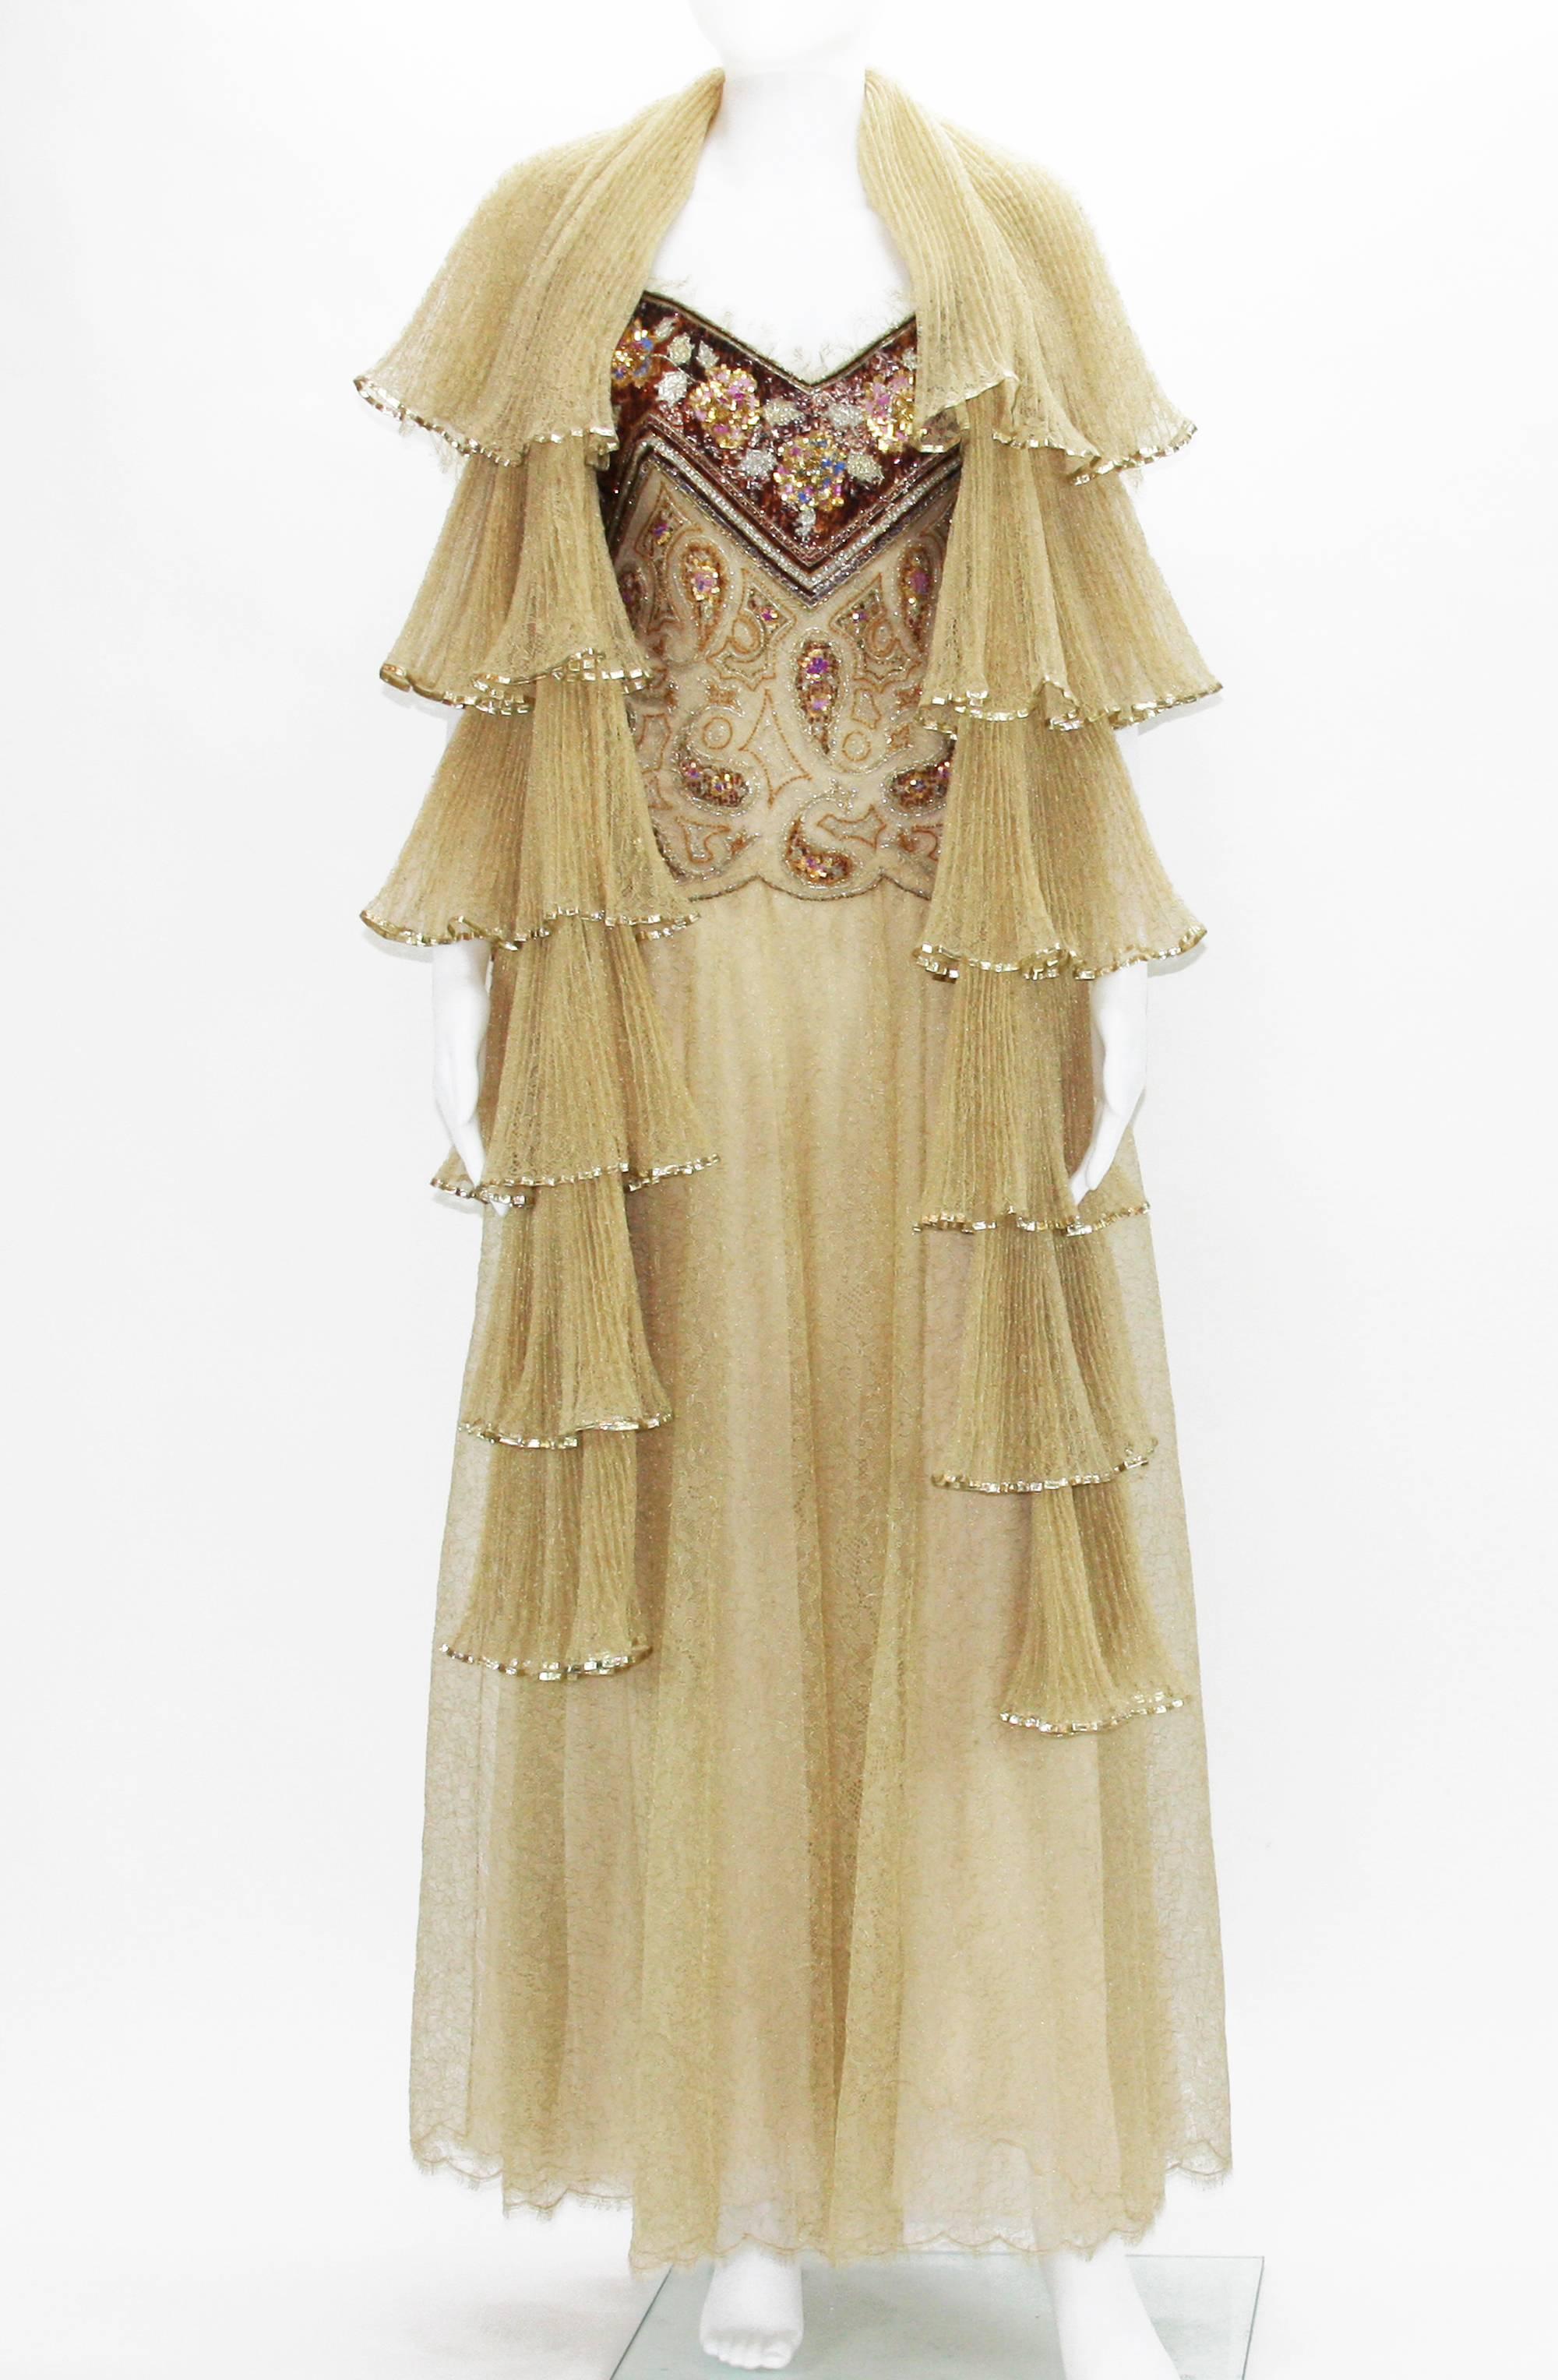 Christian Dior Automne-Hiver 1980 Dress 
Embellished with beads and sequins. Lace has metal gold thread through. Boned bodice with attached interior waist belt. Triple skirt silk lining. Every level on corrugated scarf finished with gold tone